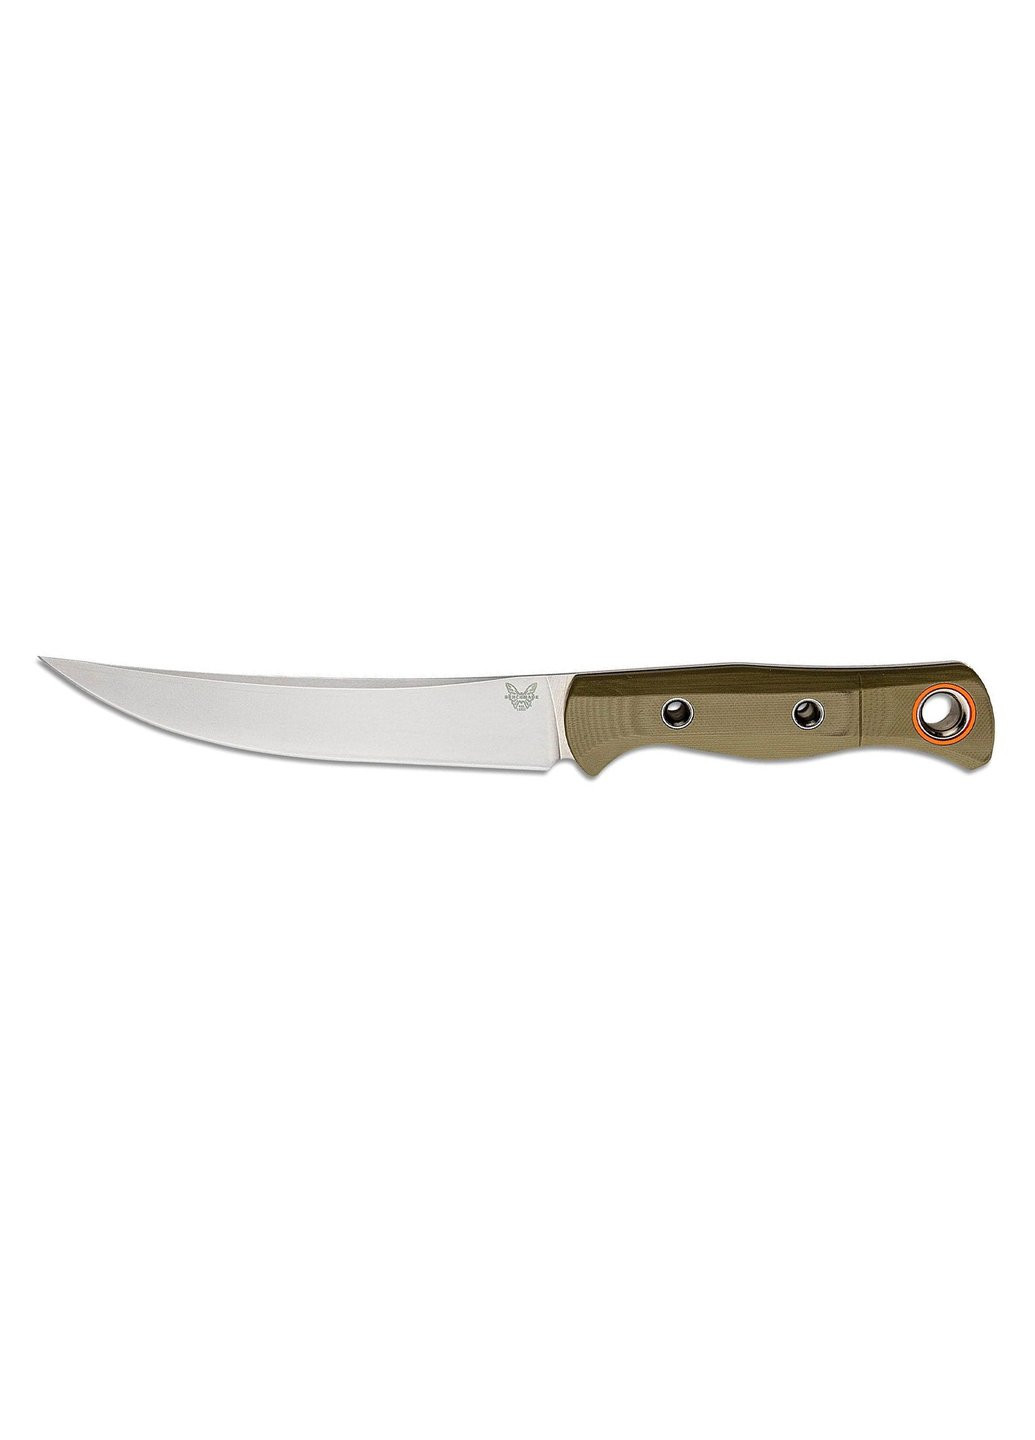 Нож Meatcrafter Olive G10 (15500-3) Benchmade (257223663)